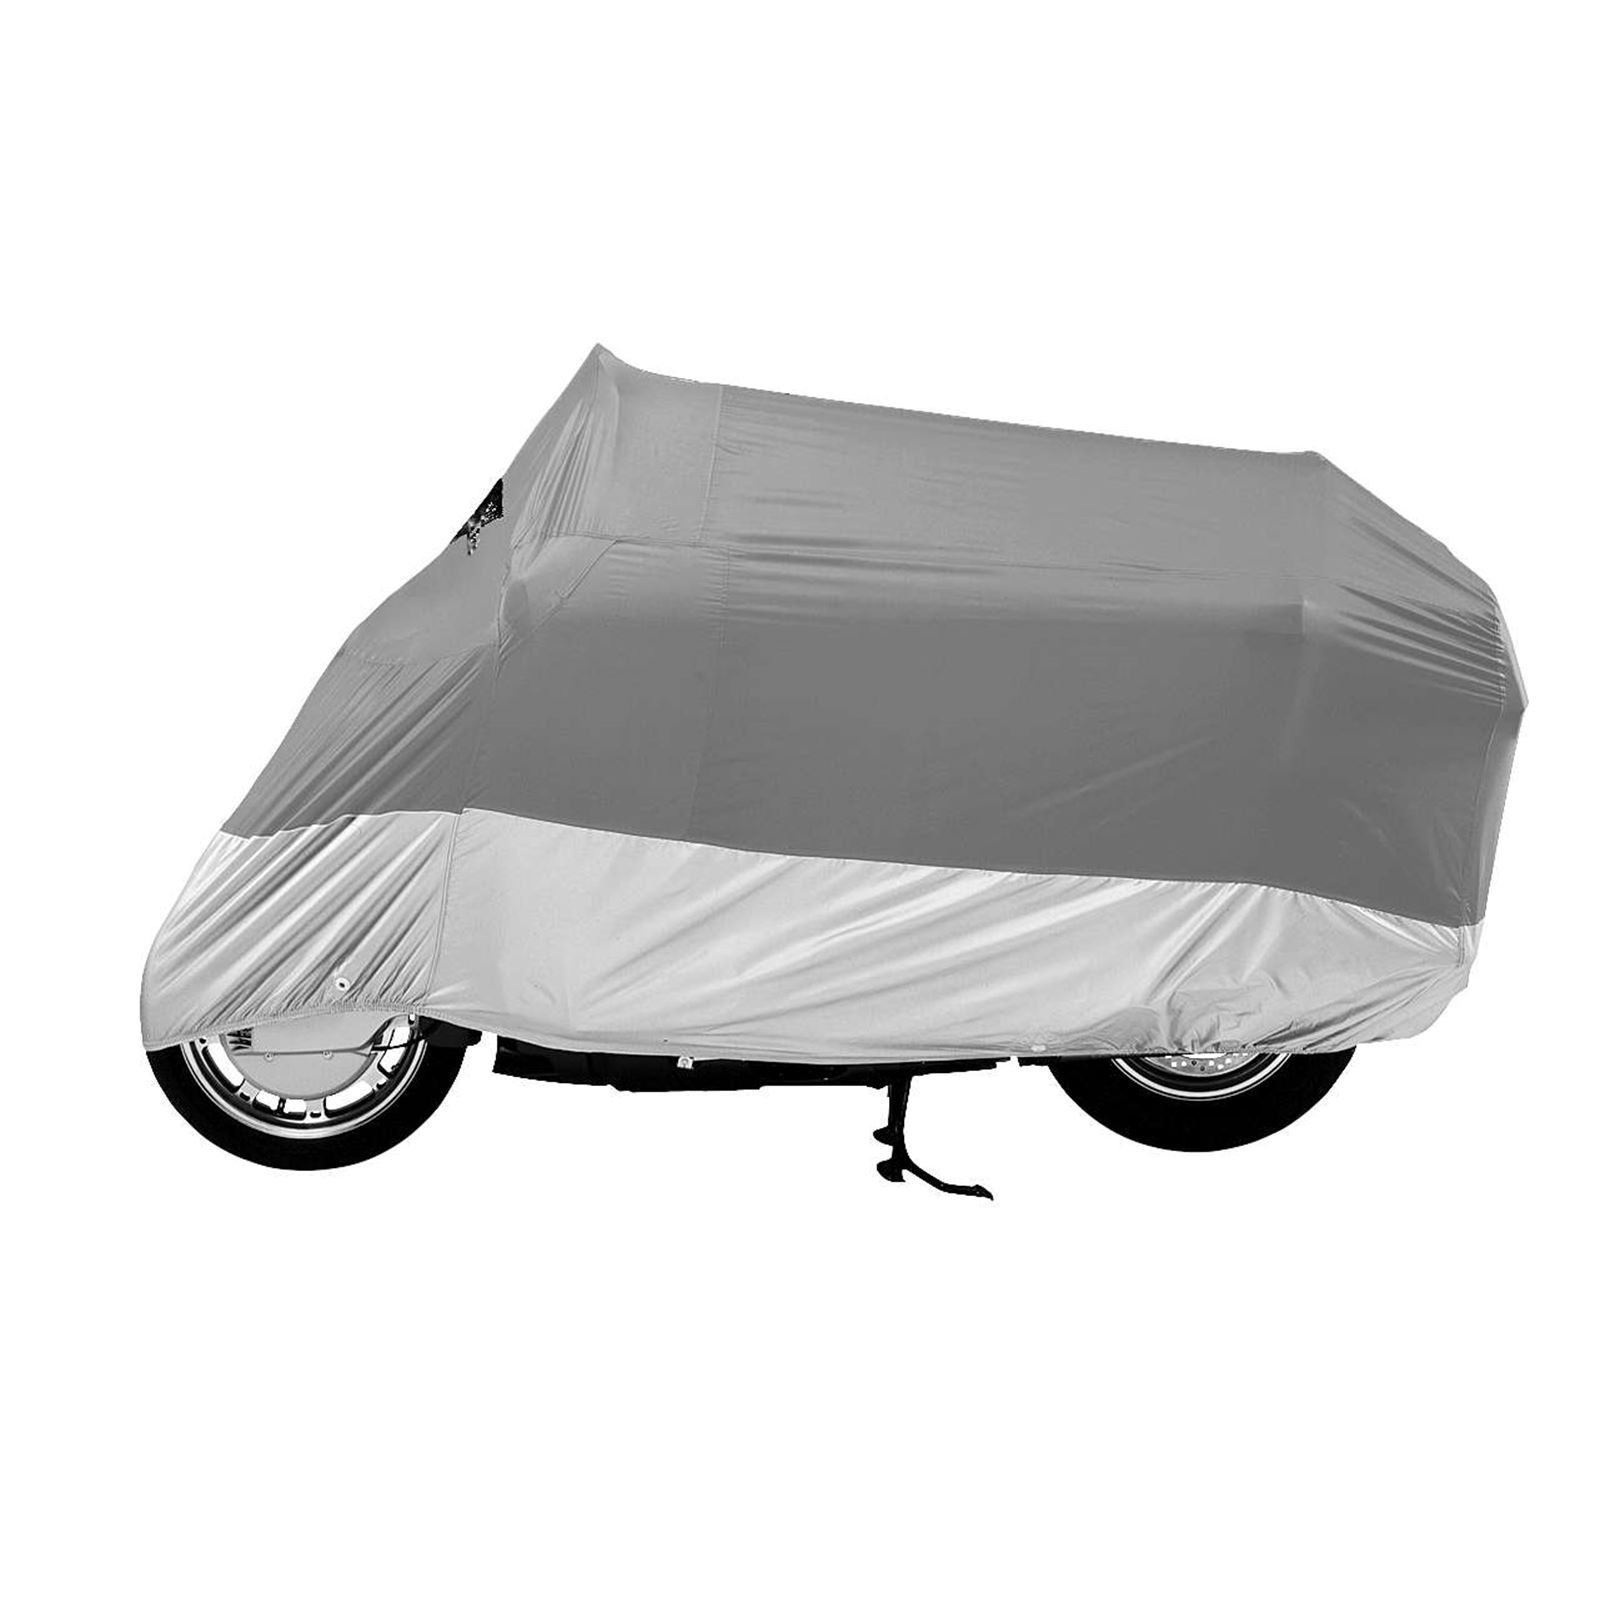 Dowco Ultralite Motorcycle Cover